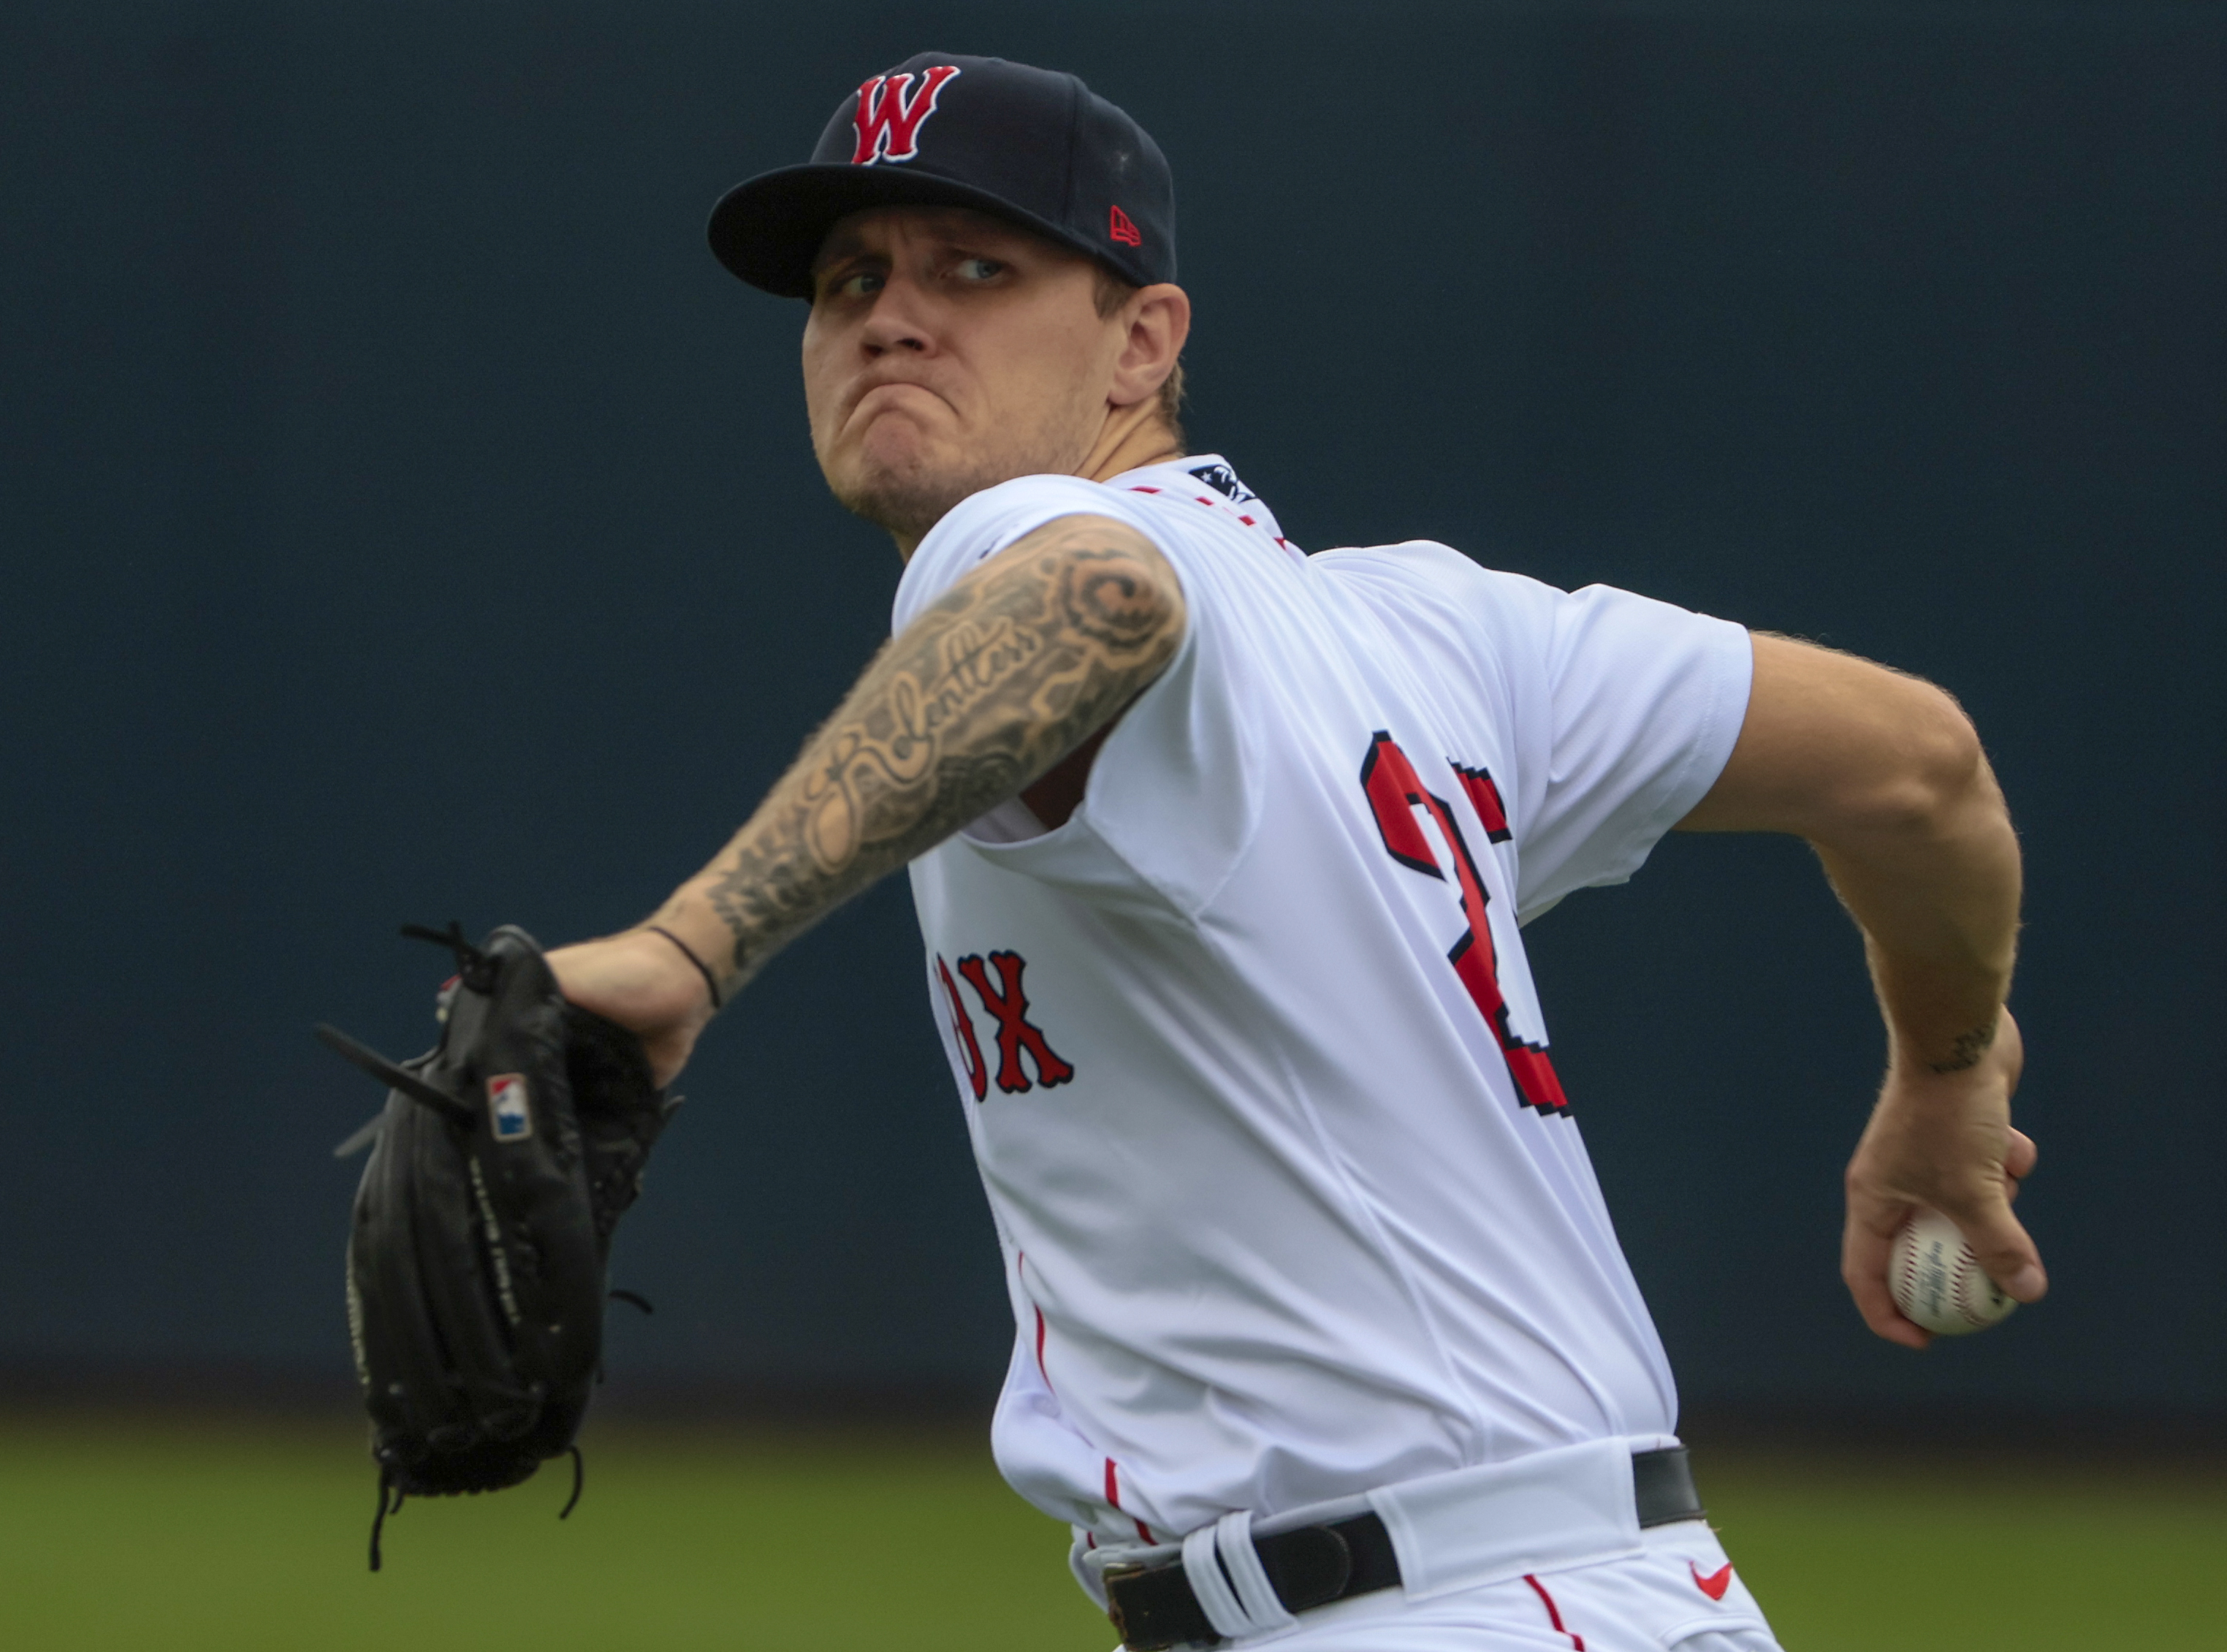 Tanner Houck is returning to the Red Sox rotation with his